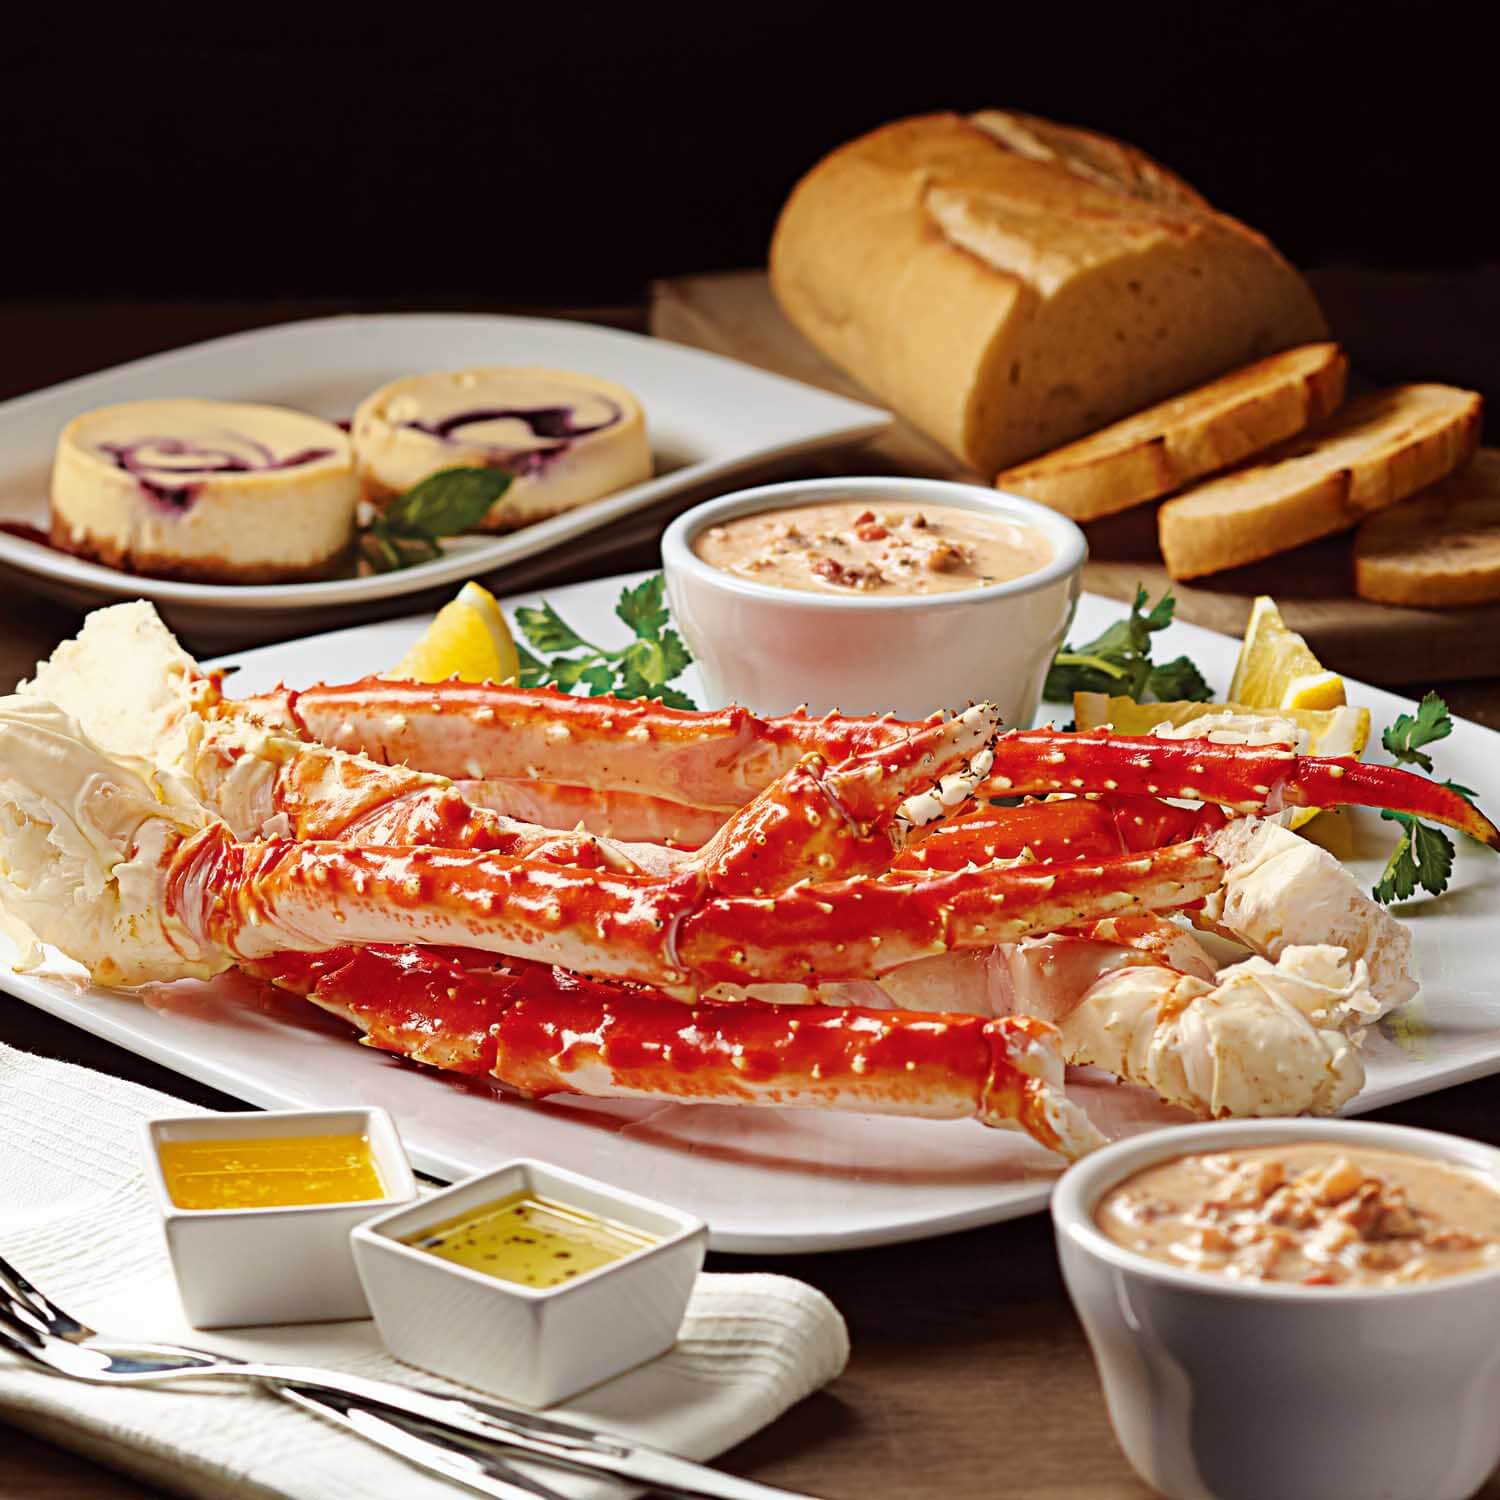 King Crab Dinner for Two